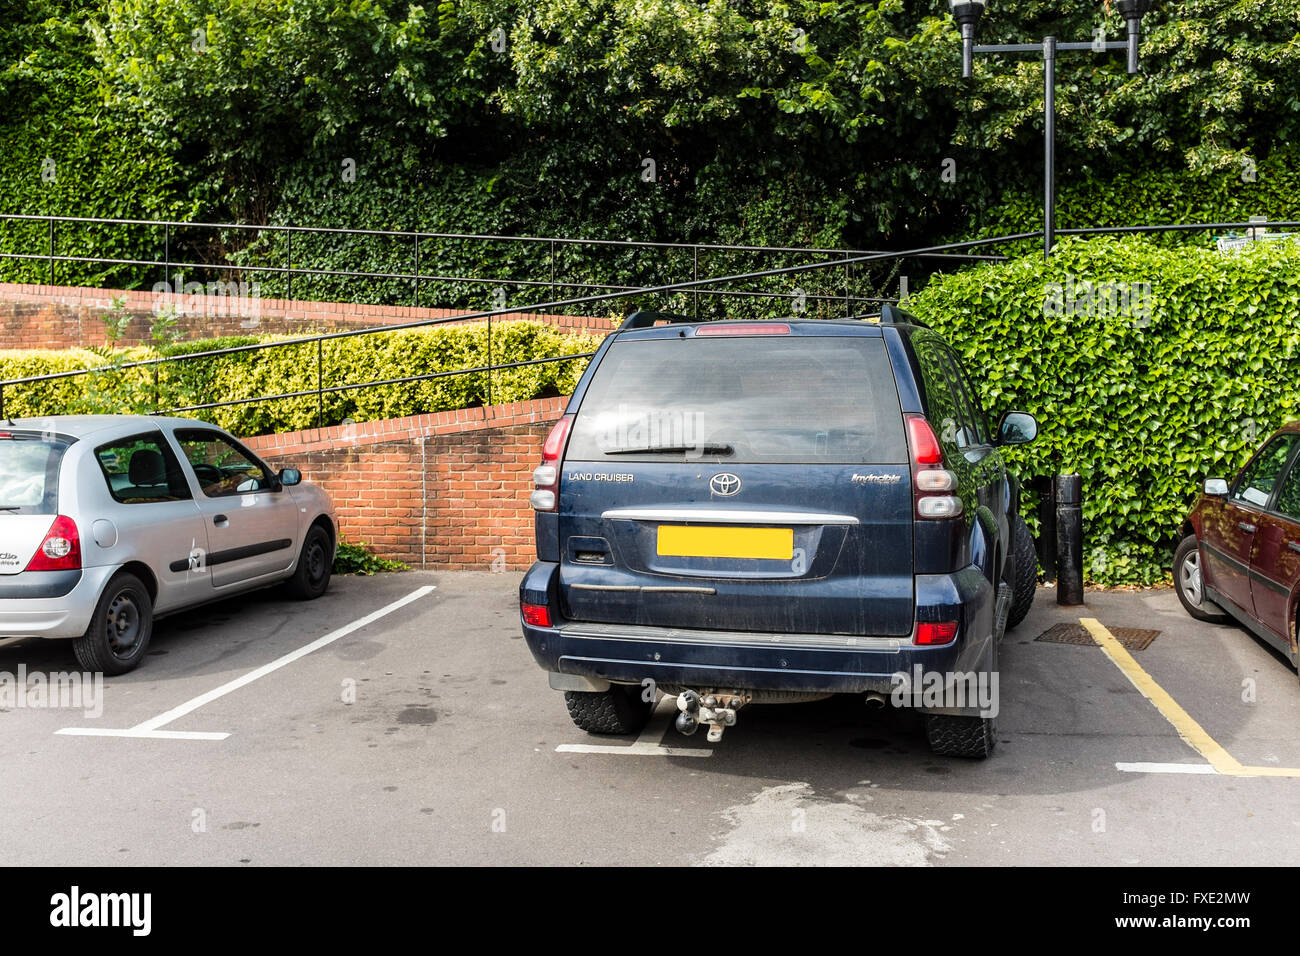 Inconsiderate parking in a car park, UK Stock Photo